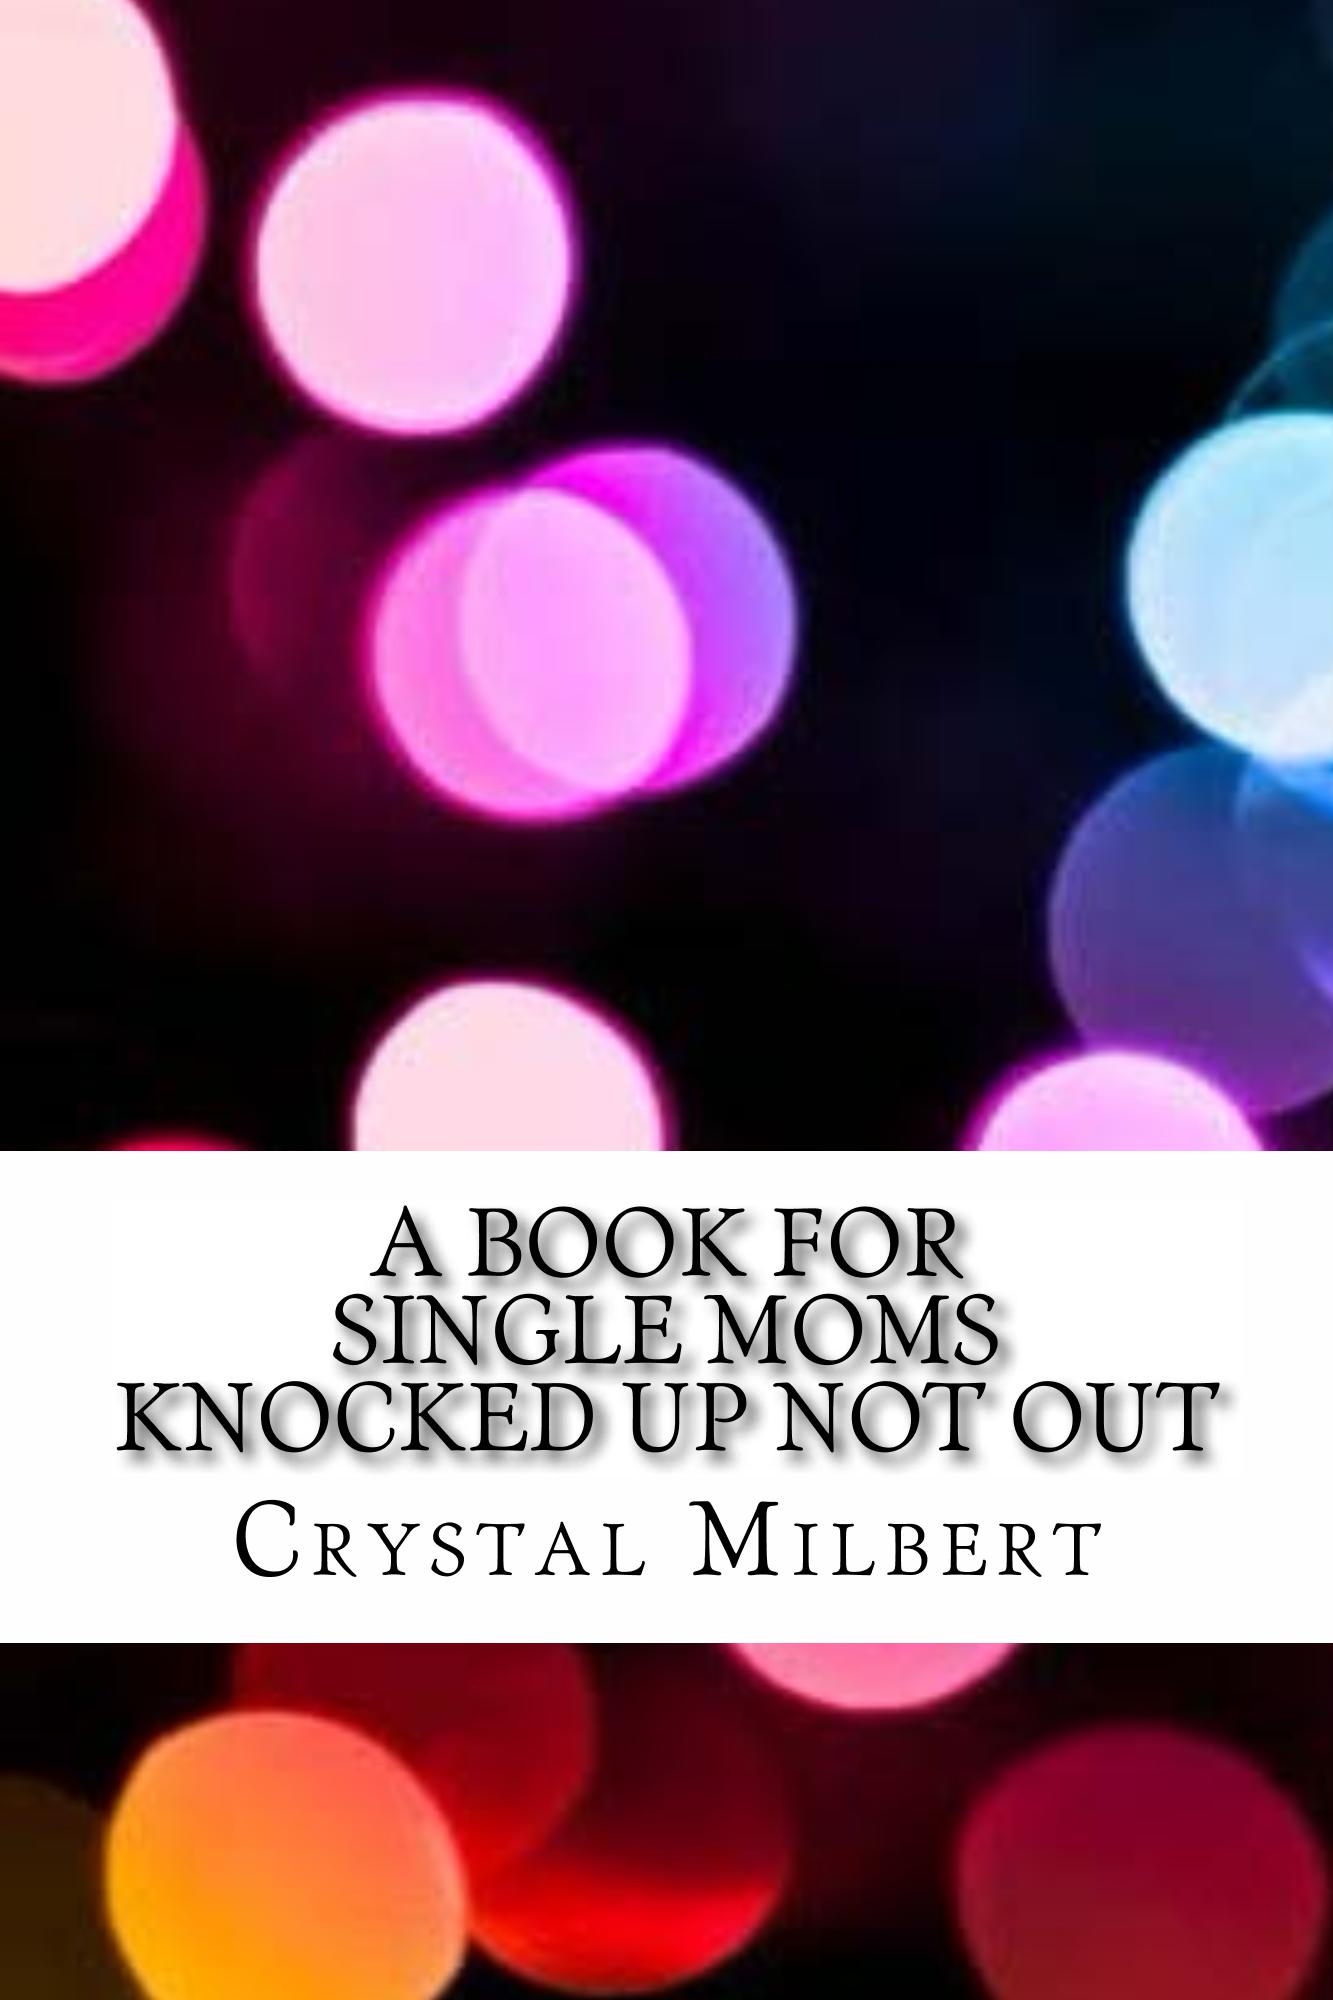 FREE: A Book For Single Moms Knocked Up Not Out by Crystal Milbert